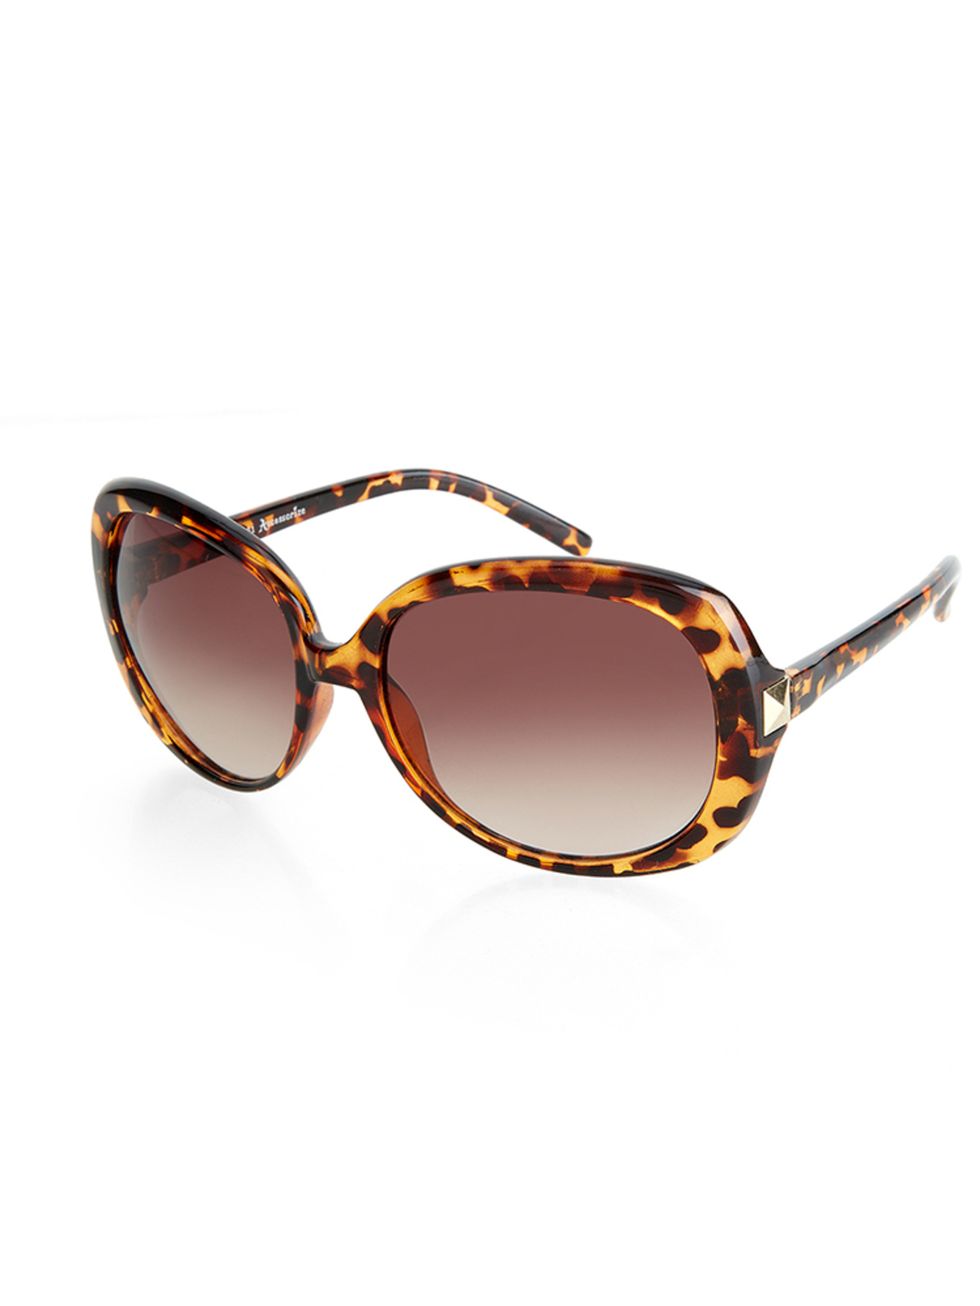 <p><a href="http://uk.accessorize.com/view/product/uk_catalog/acc_5.2/7932612700" target="_blank">Accessorize</a> sunglasses, £15</p>